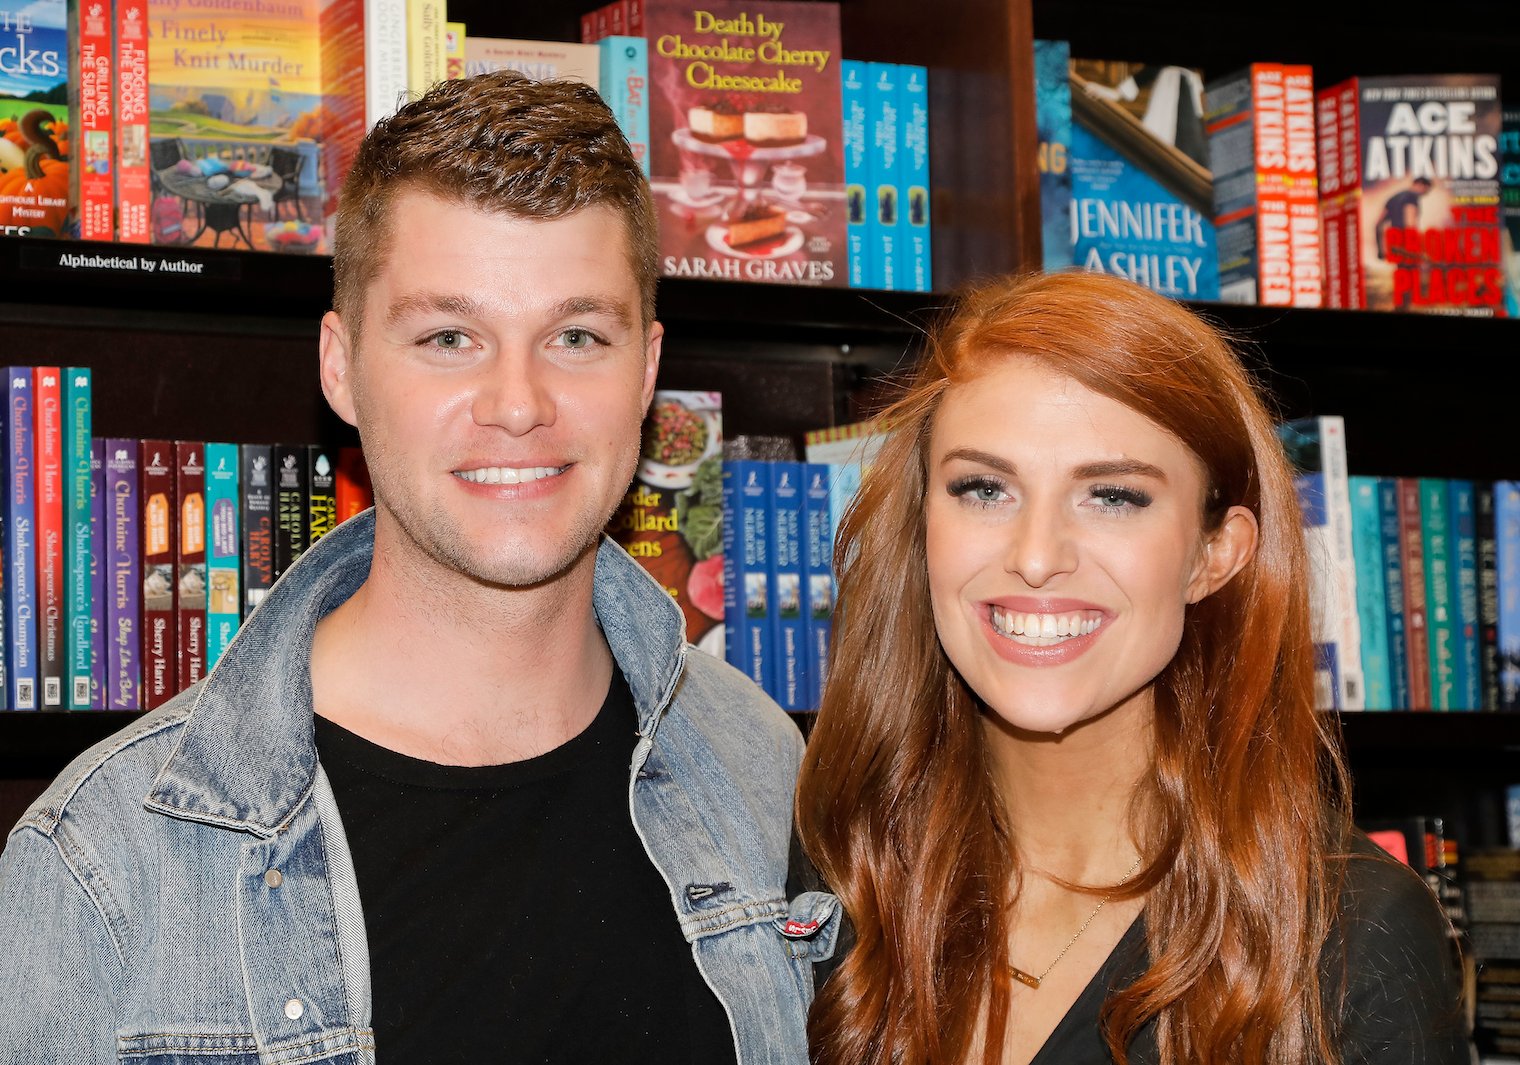 Jeremy Roloff and Audrey Roloff from 'Little People, Big World' standing next to each other and smiling.